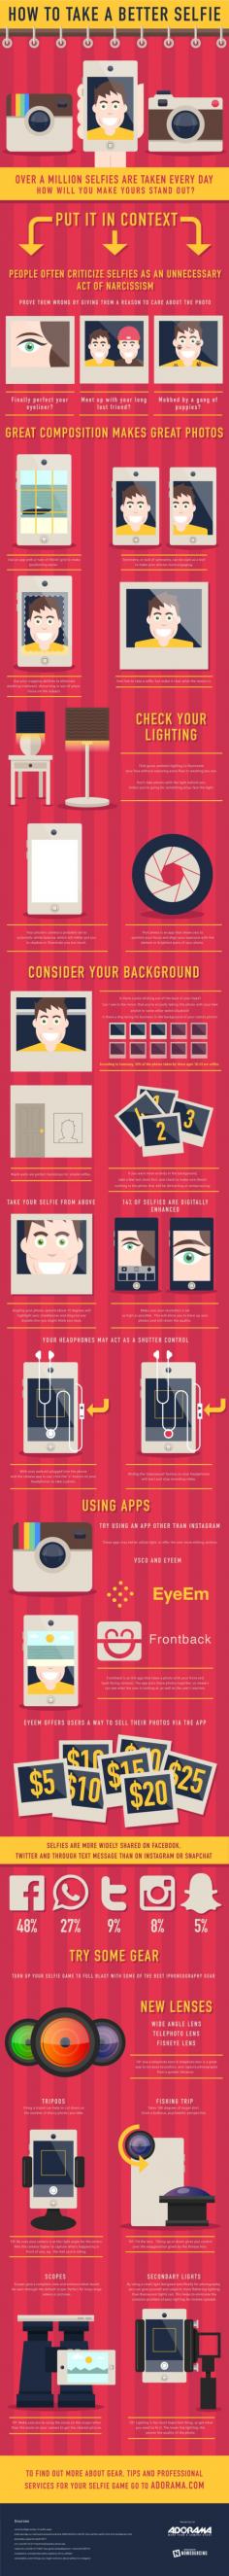 How to Take a Better #Selfie [INFOGRAPHIC]